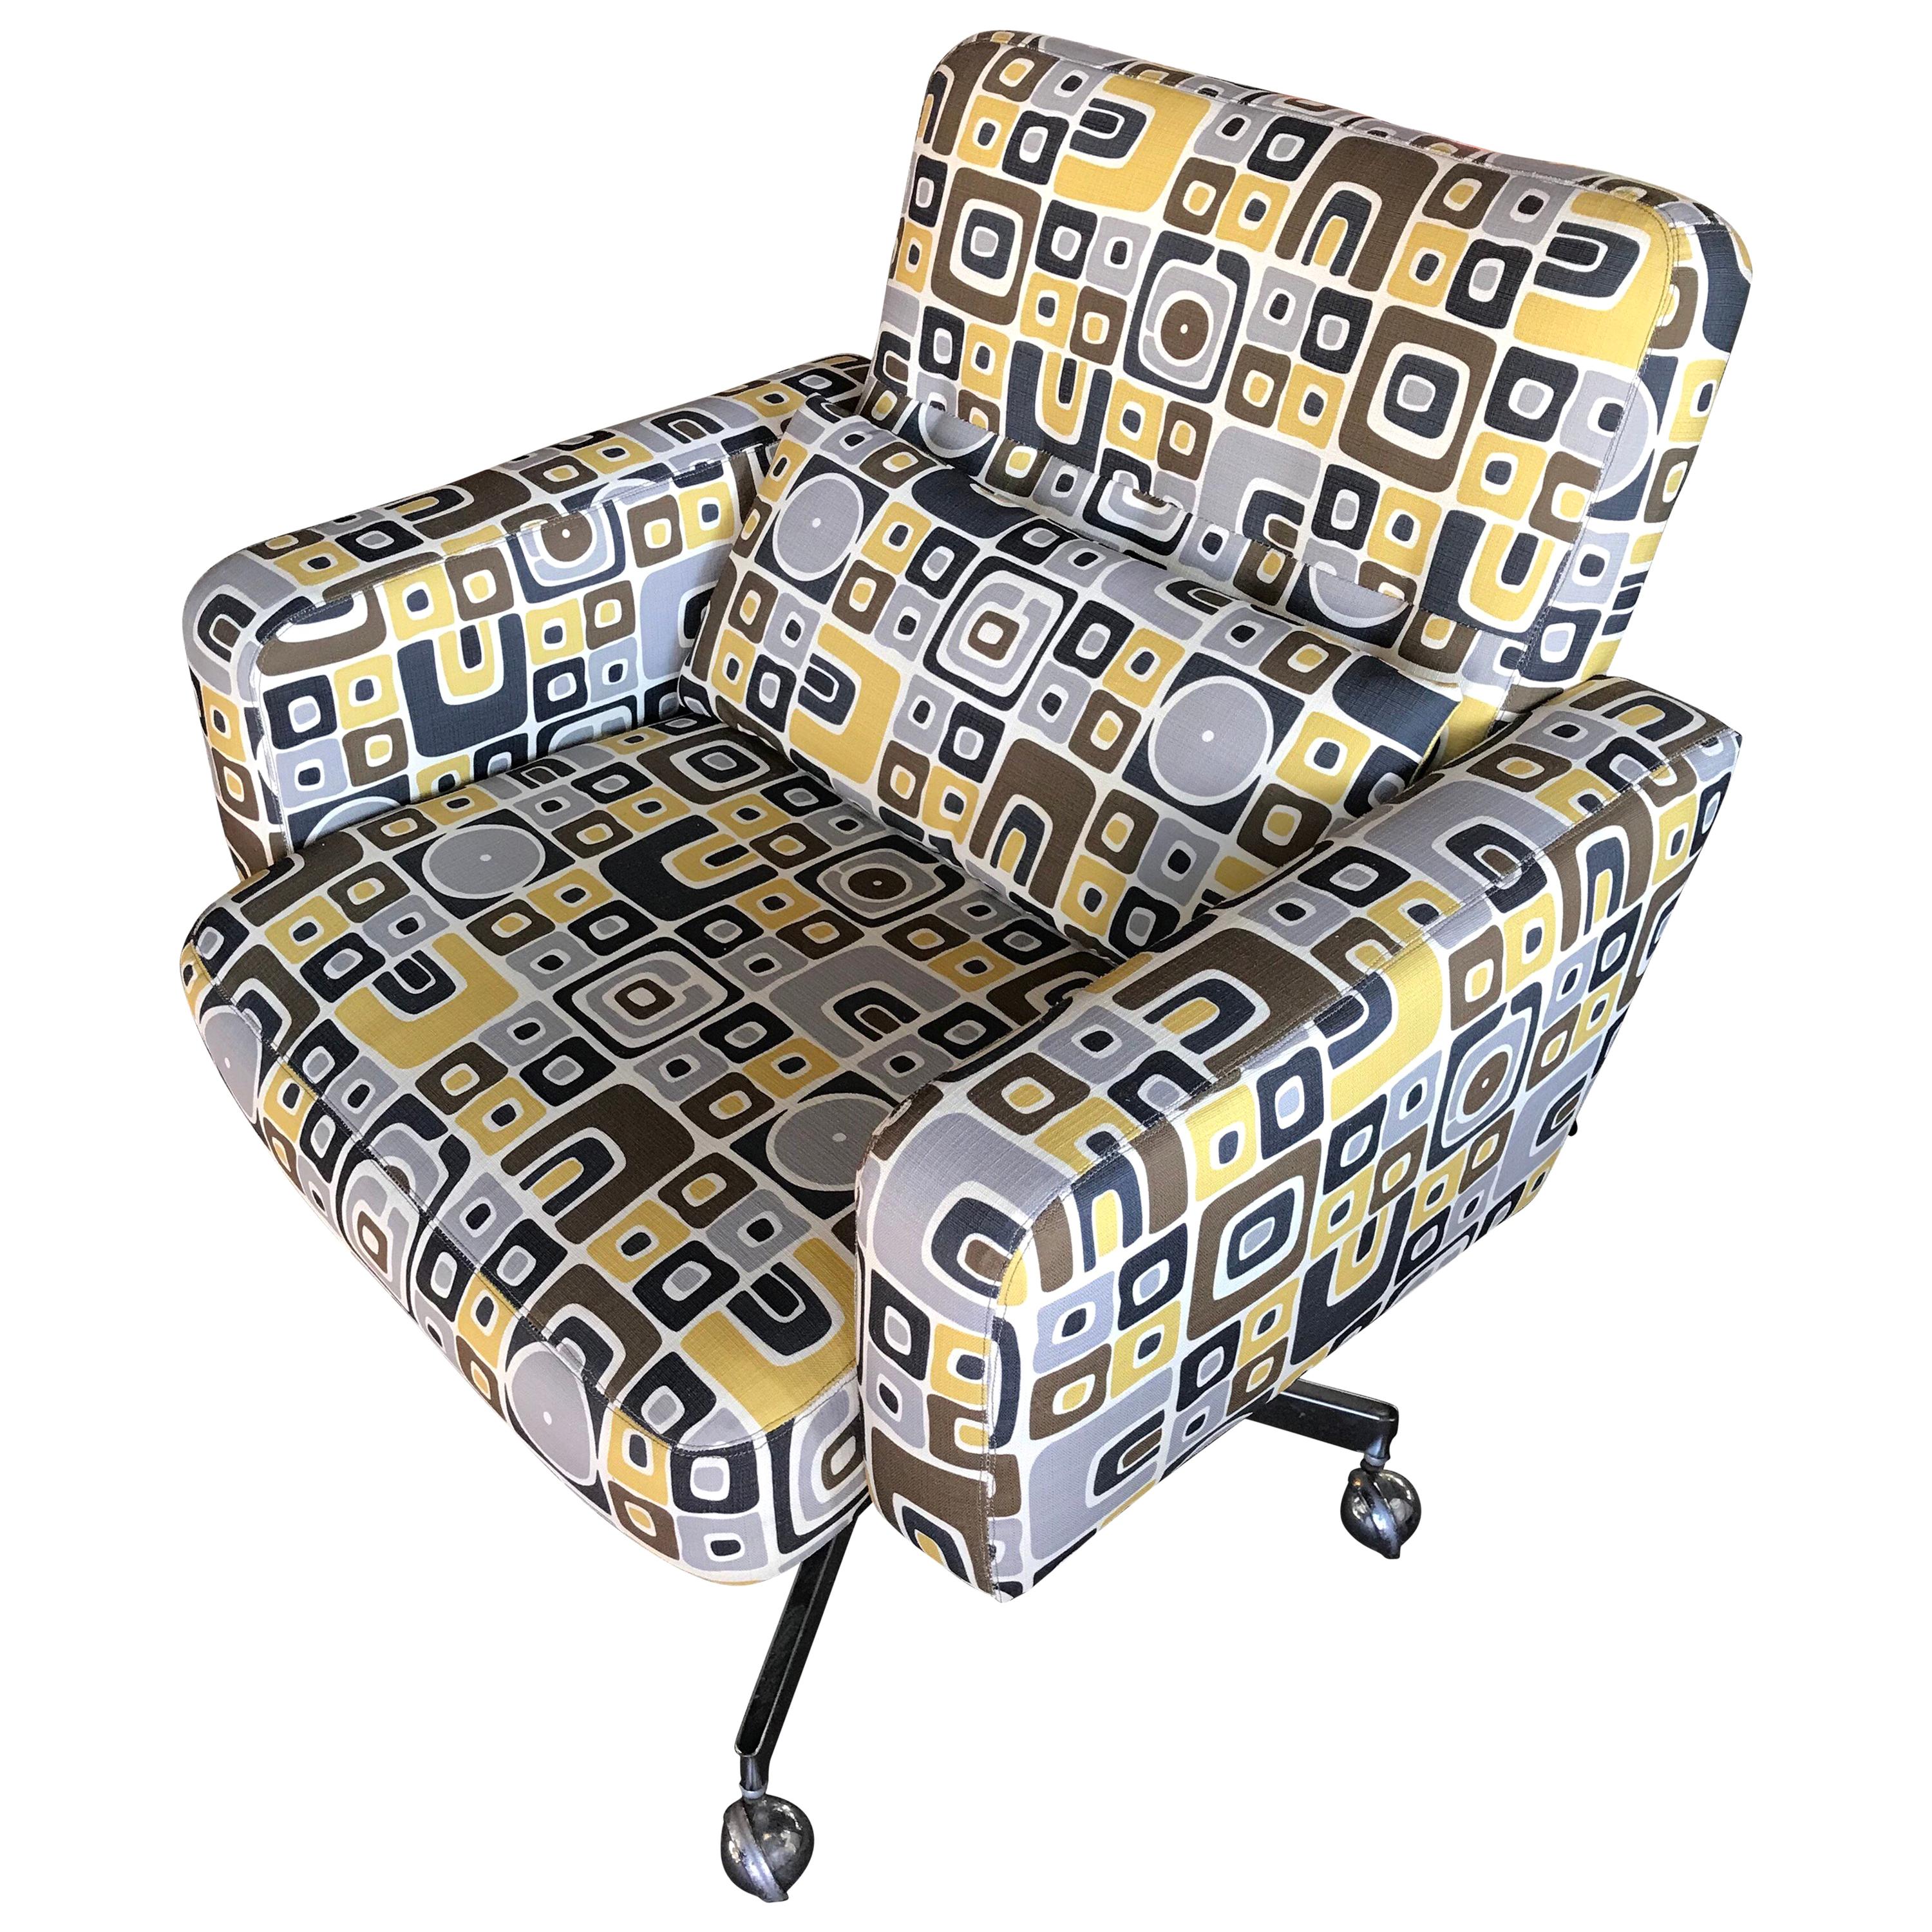 Steve Chase Desk Chair Chrome Base/Casters in Modern Graphic Print